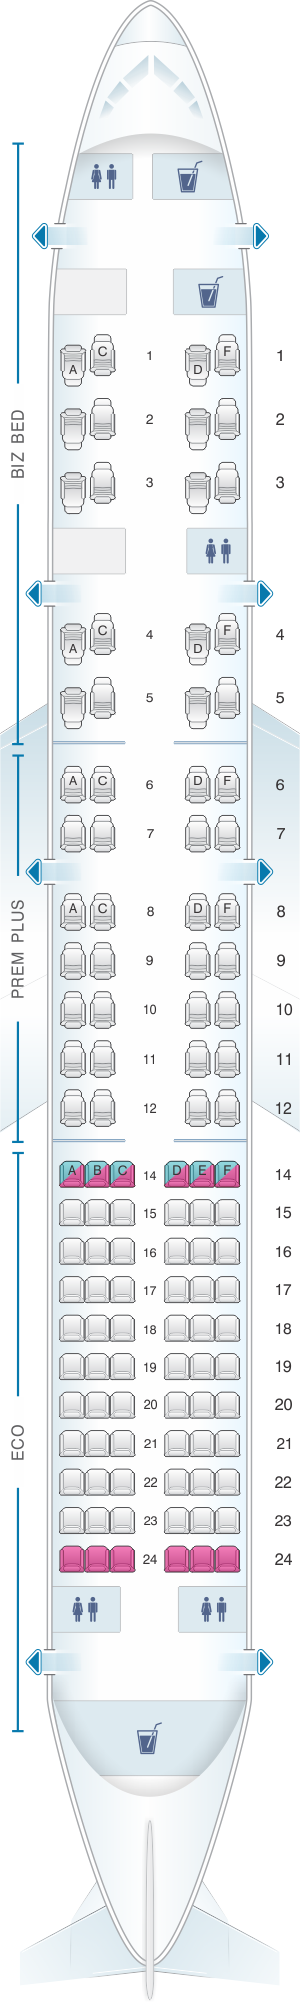 Boeing 757 200 Jet Seating Chart